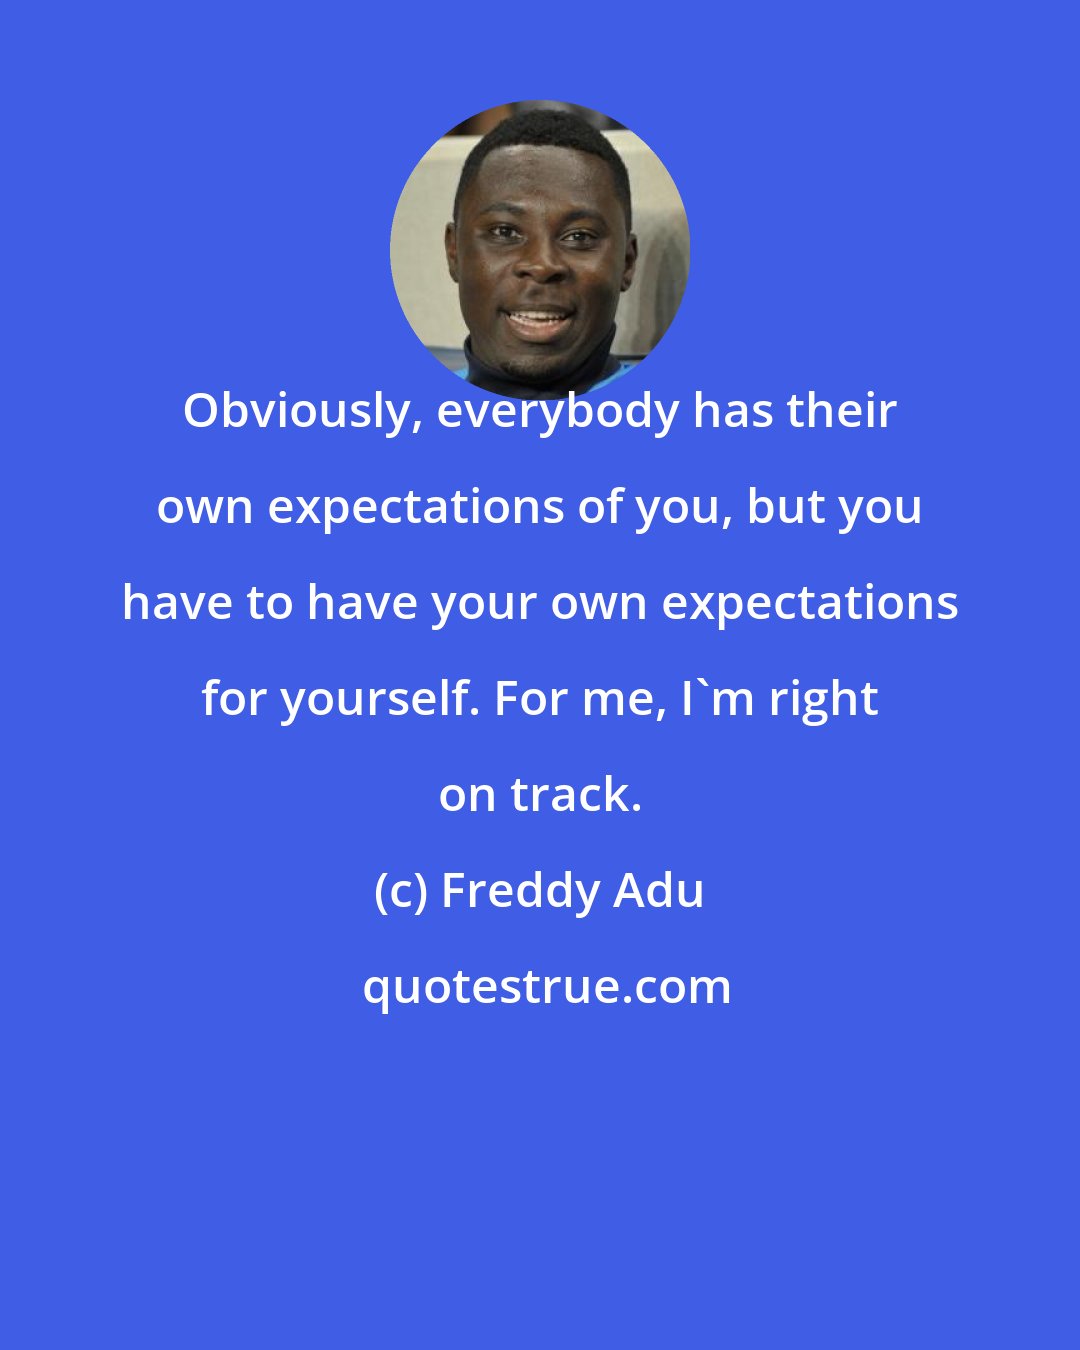 Freddy Adu: Obviously, everybody has their own expectations of you, but you have to have your own expectations for yourself. For me, I'm right on track.